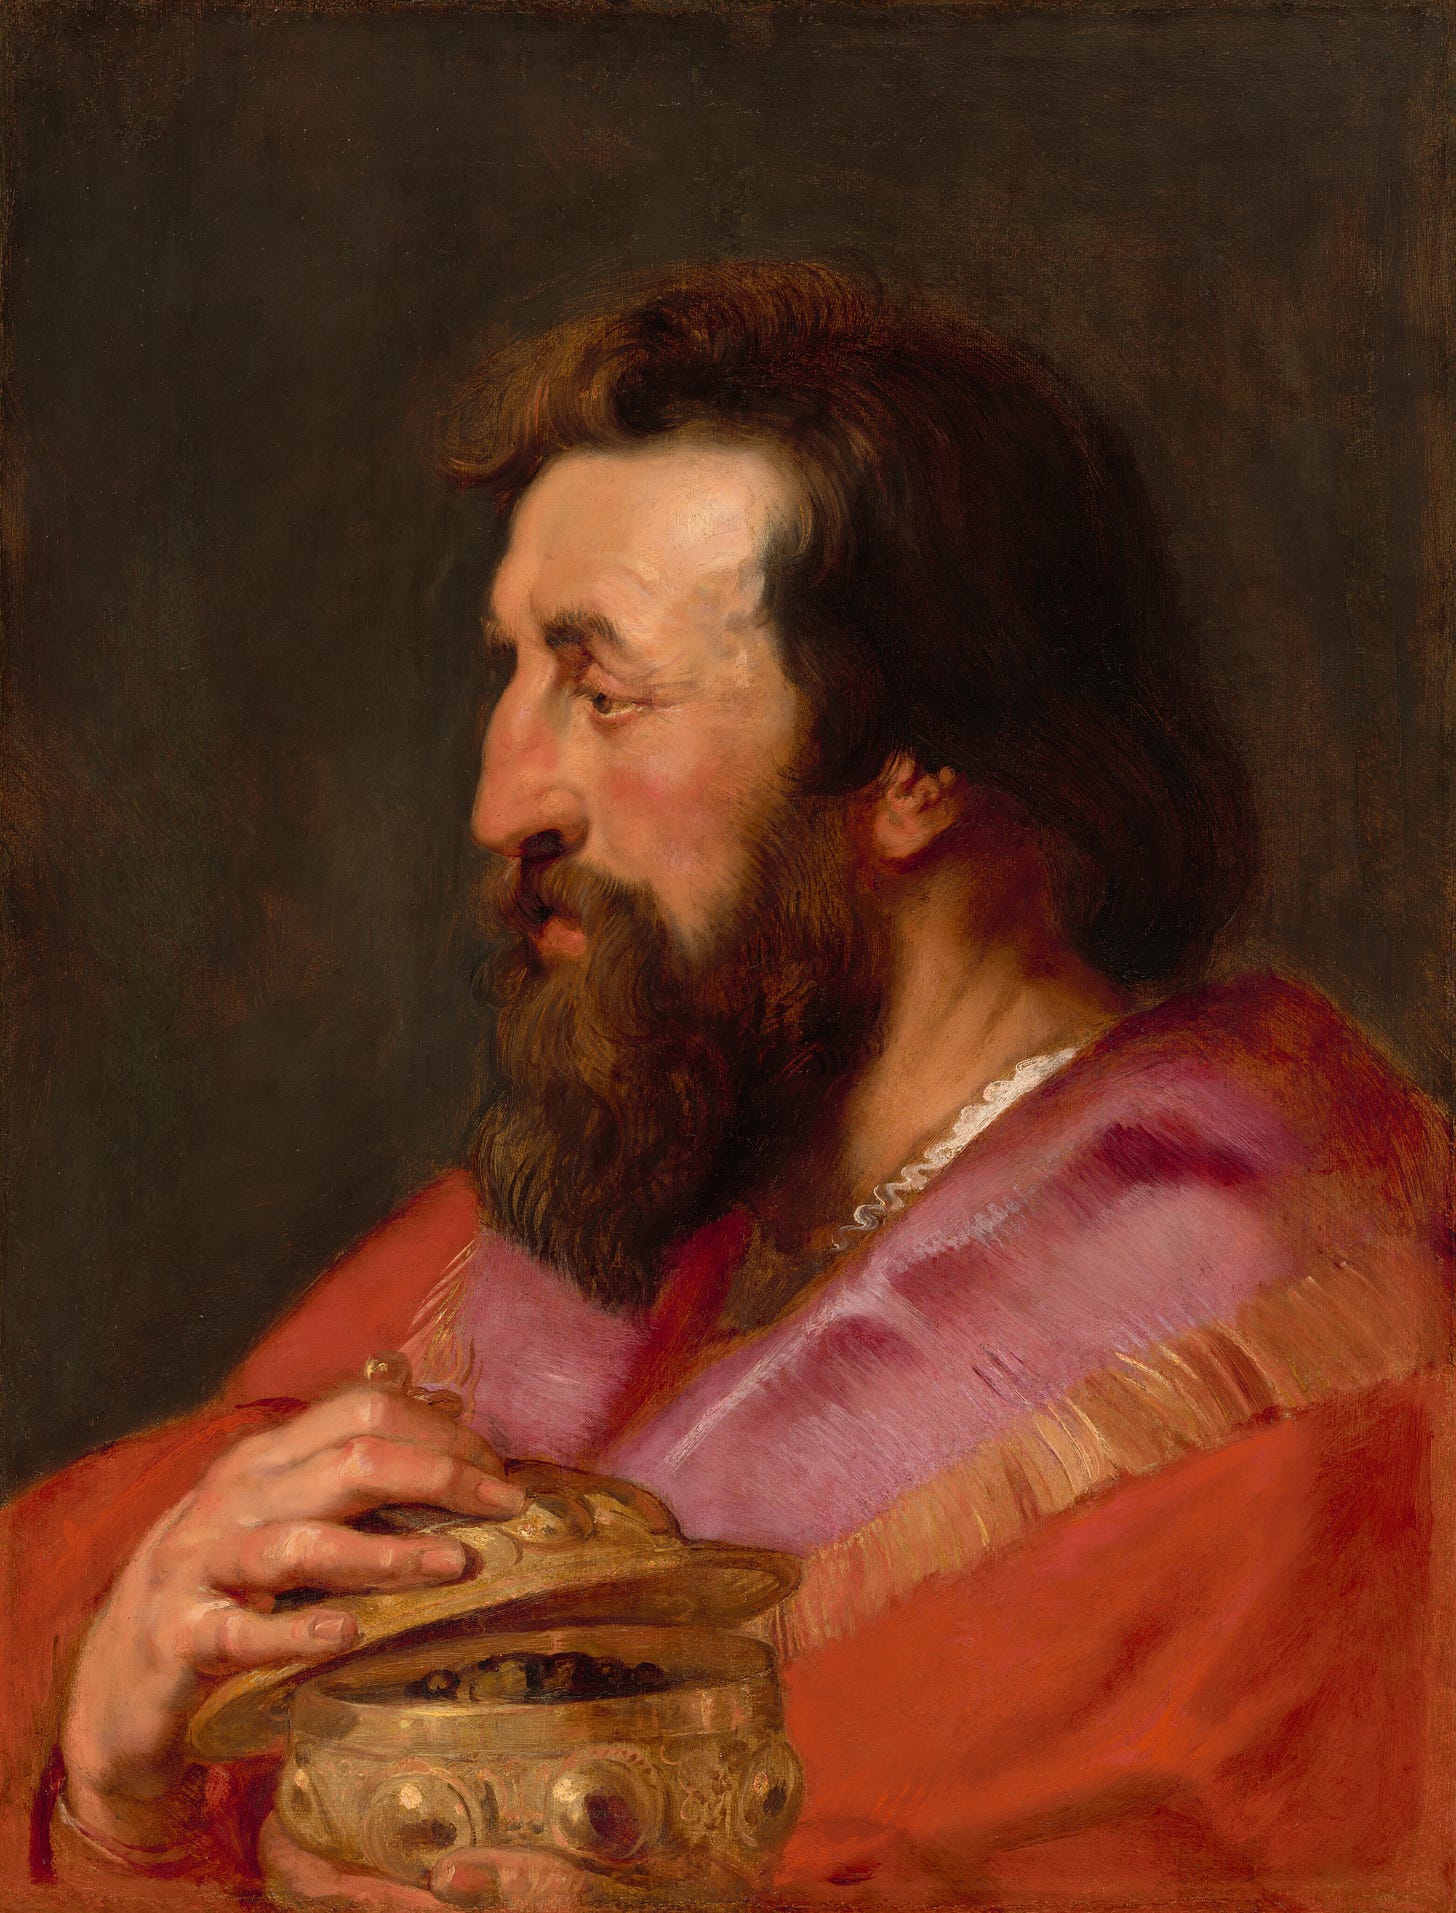 Head of One of the Three Kings: Melchior, The Assyrian King, c. 1618 by Sir Peter Paul Rubens